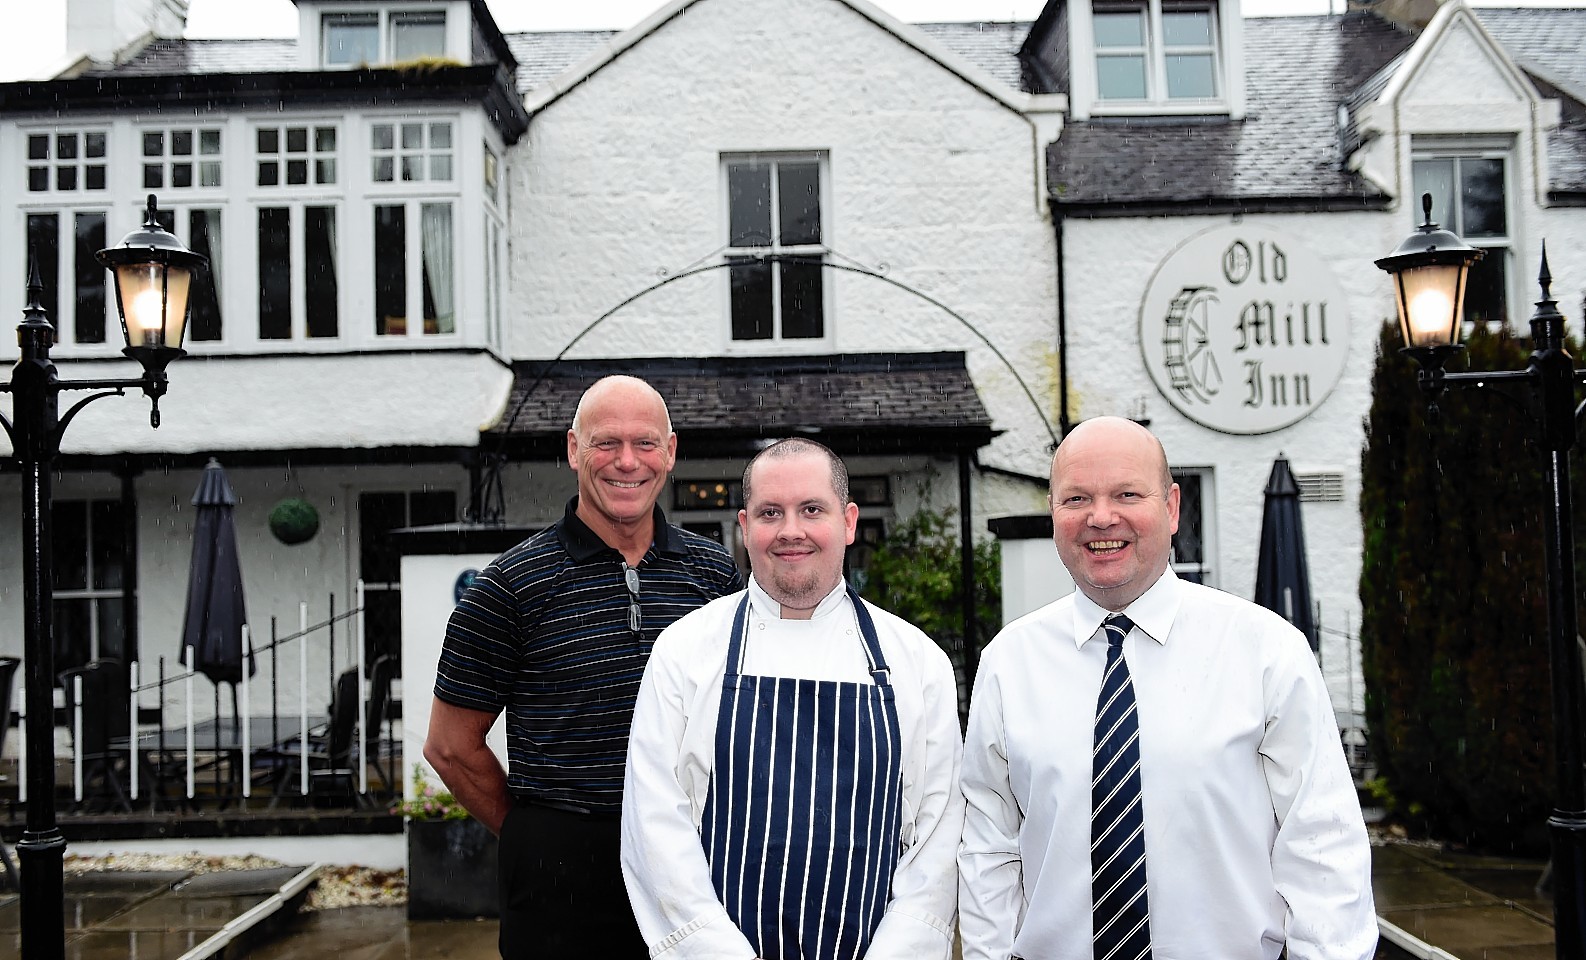 The Old Mill Inn, Maryculter, has reopened after almost a year.    
Pictured - Owners Vic Sang (left) and Mike French (right) with head chef Darren McKay (middle) at the inn on it's first day back open.   Picture by Kami Thomson